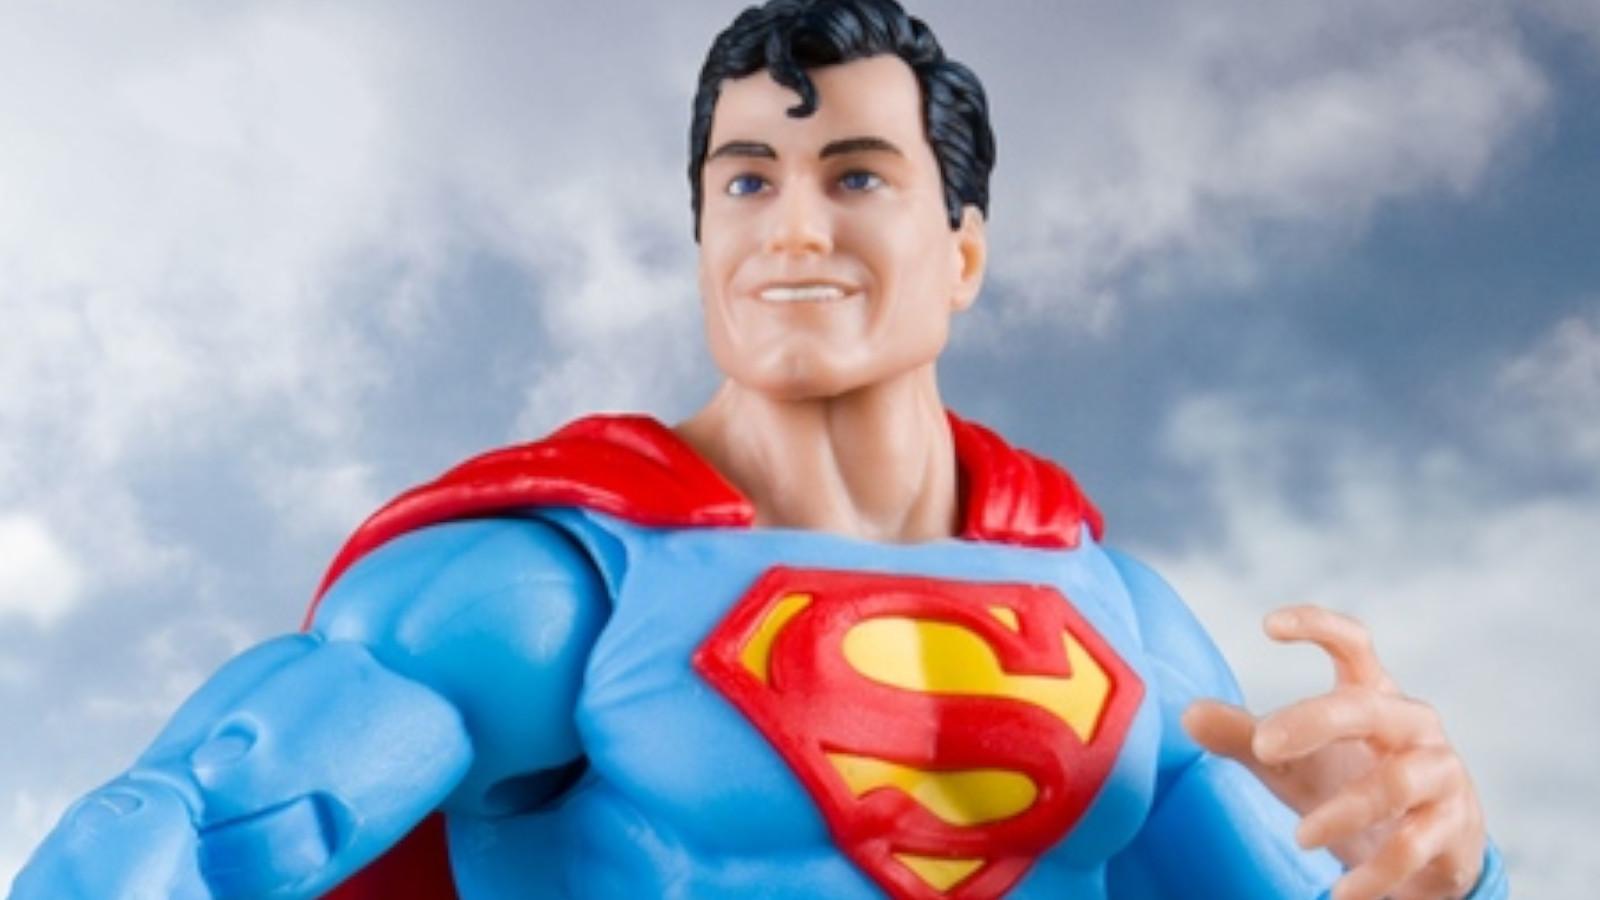 DC Classic Superman from McFarlane toys